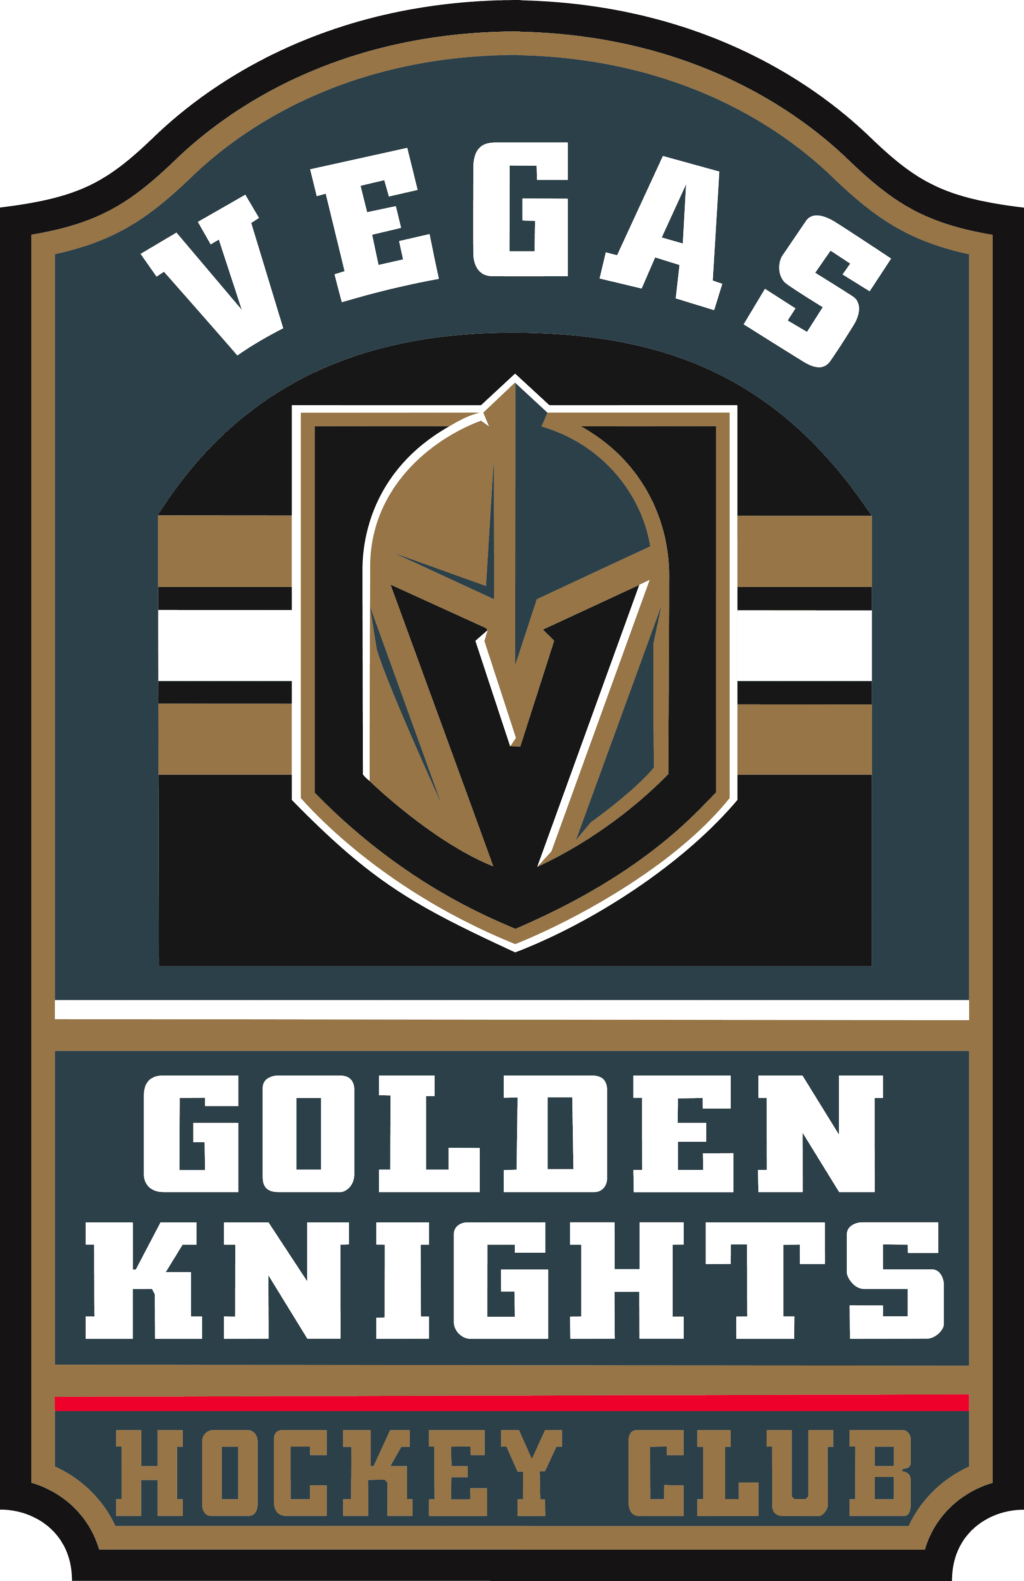 vgk 09 NHL Vegas Golden Knights, Vegas Golden Knights SVG Vector, Vegas Golden Knights Clipart, Vegas Golden Knights Ice Hockey Kit SVG, DXF, PNG, EPS Instant download NHL-Files for silhouette, files for clipping.